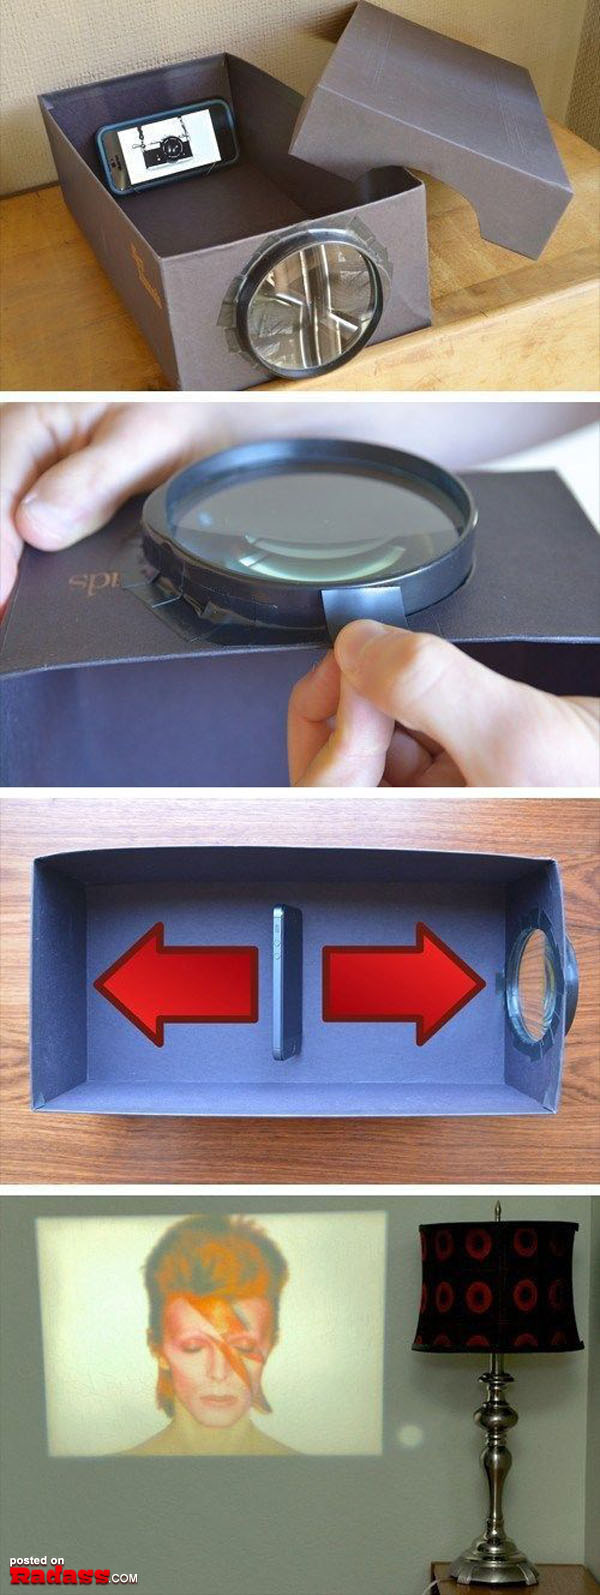 A series of pictures demonstrating the usage of a projector.